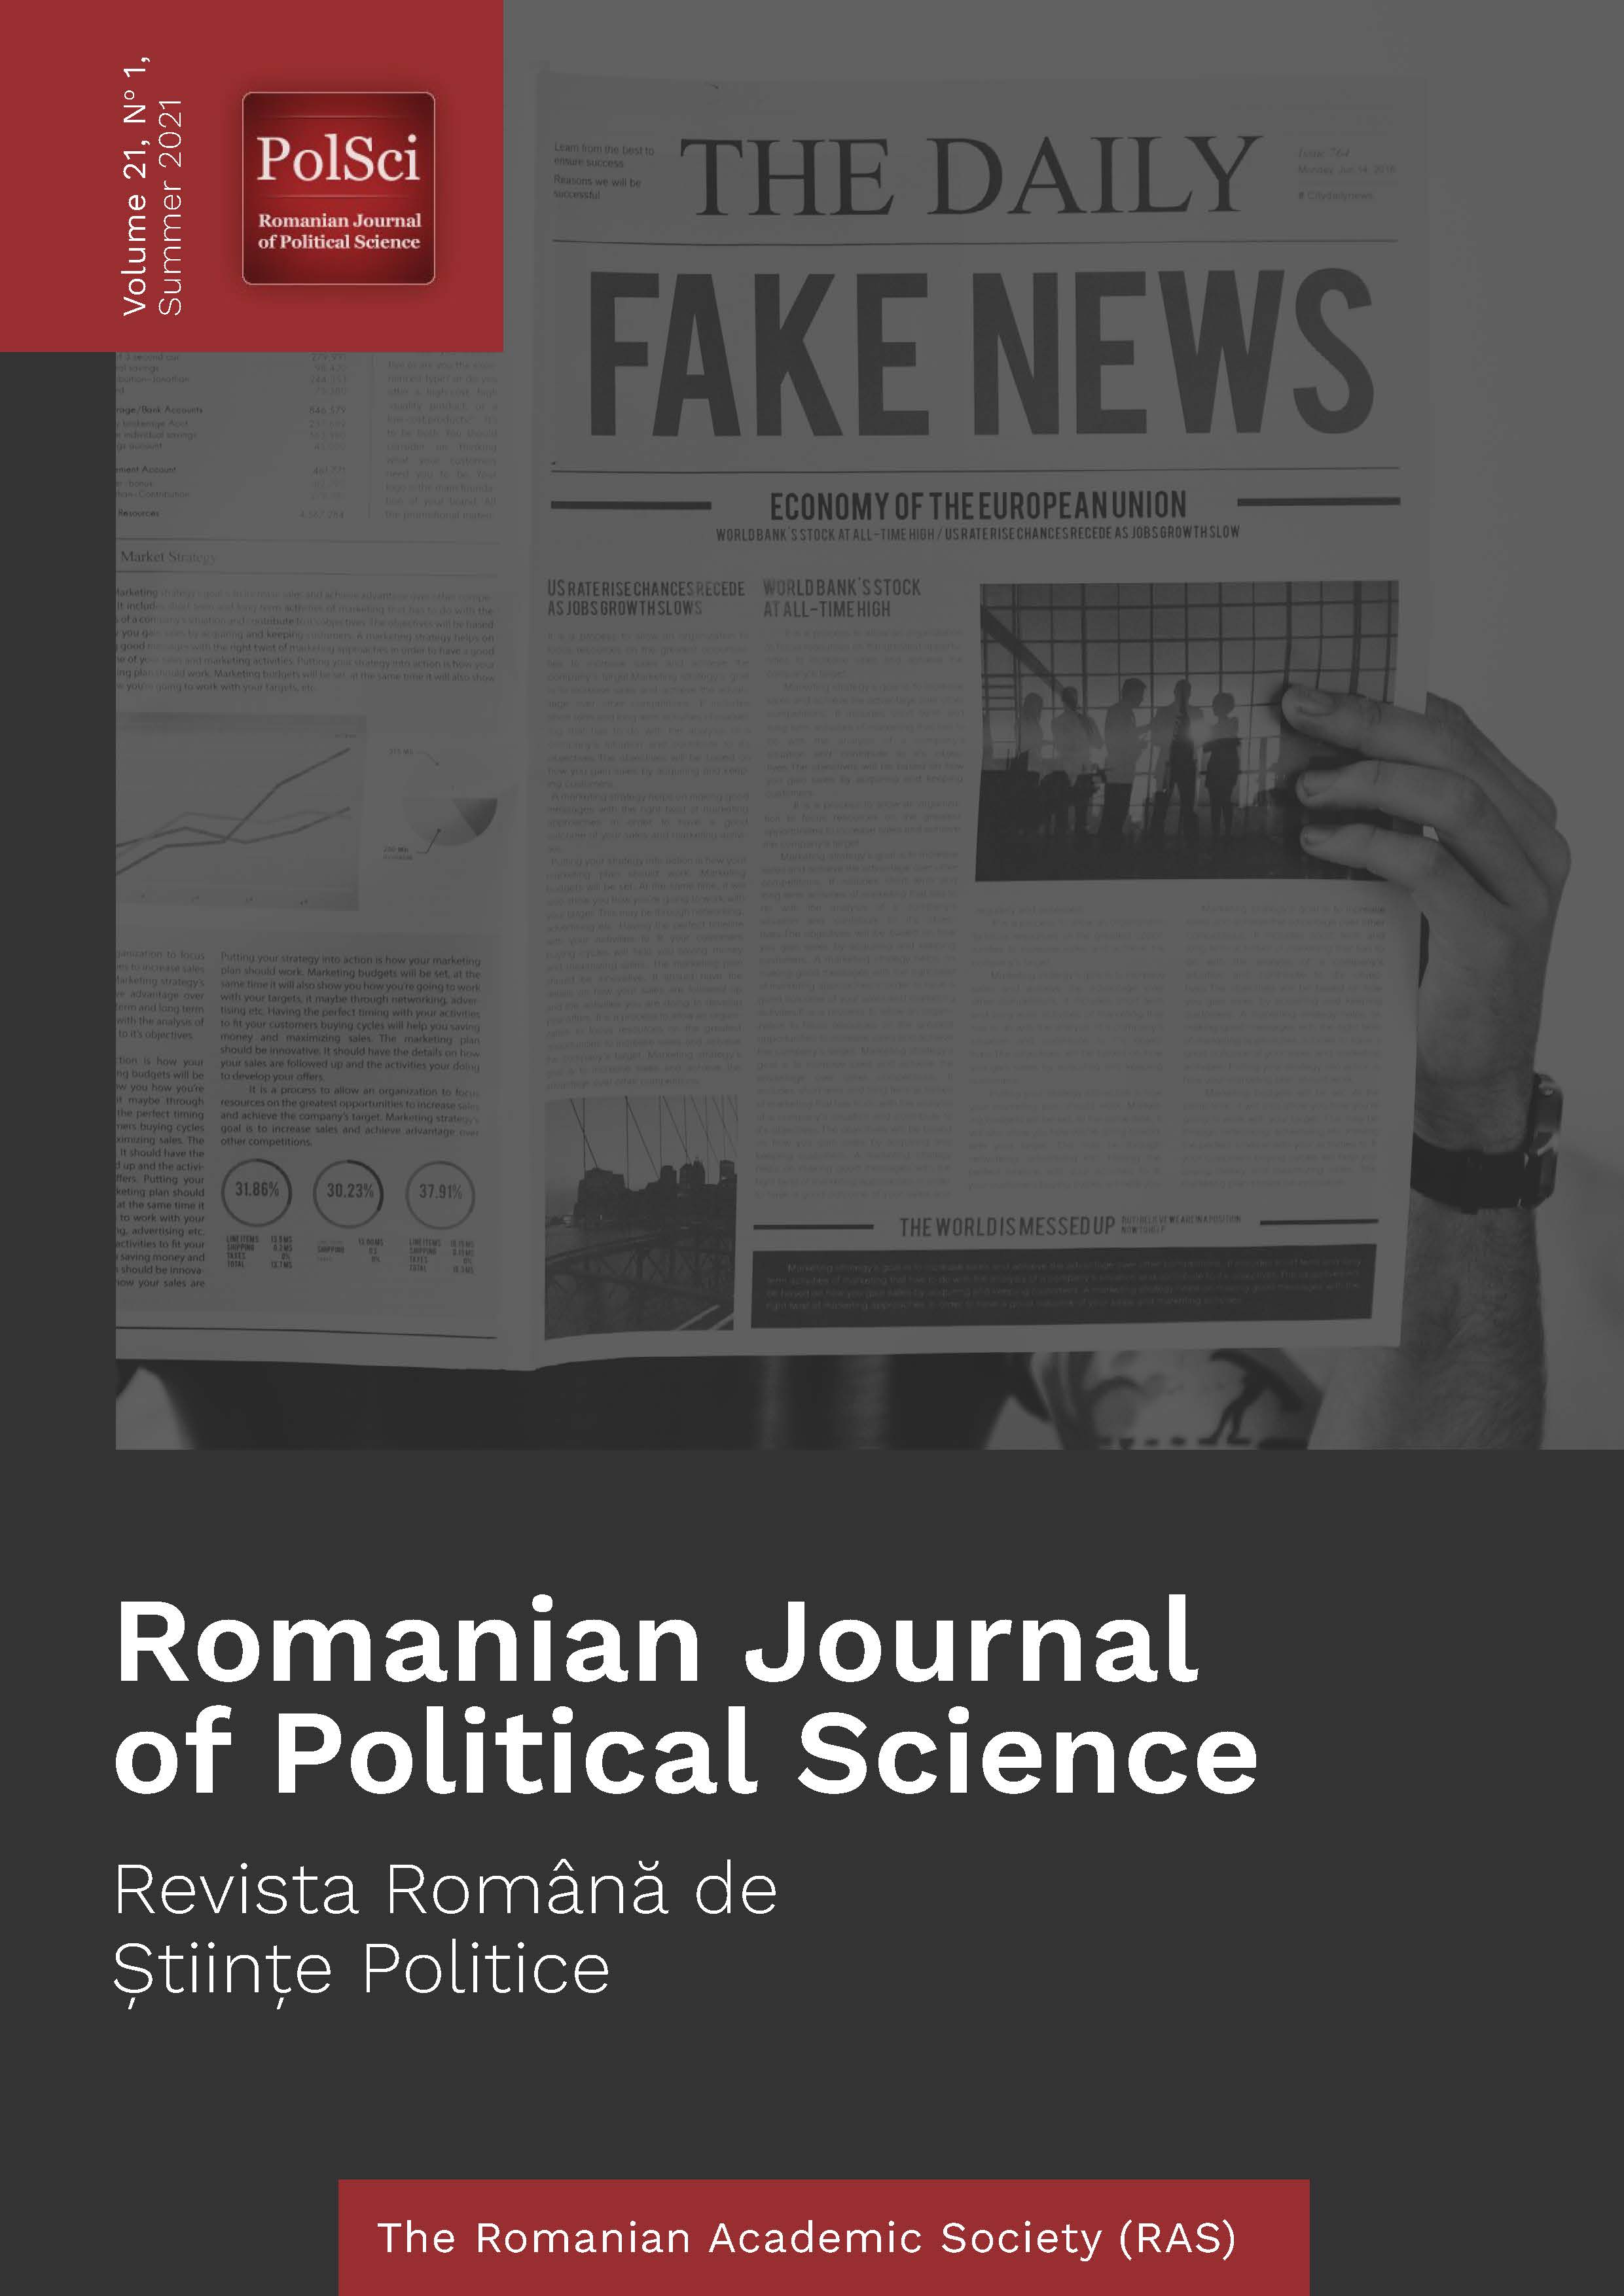 Framing the largest recent Romanian protests: a content analysis of European online newspapers